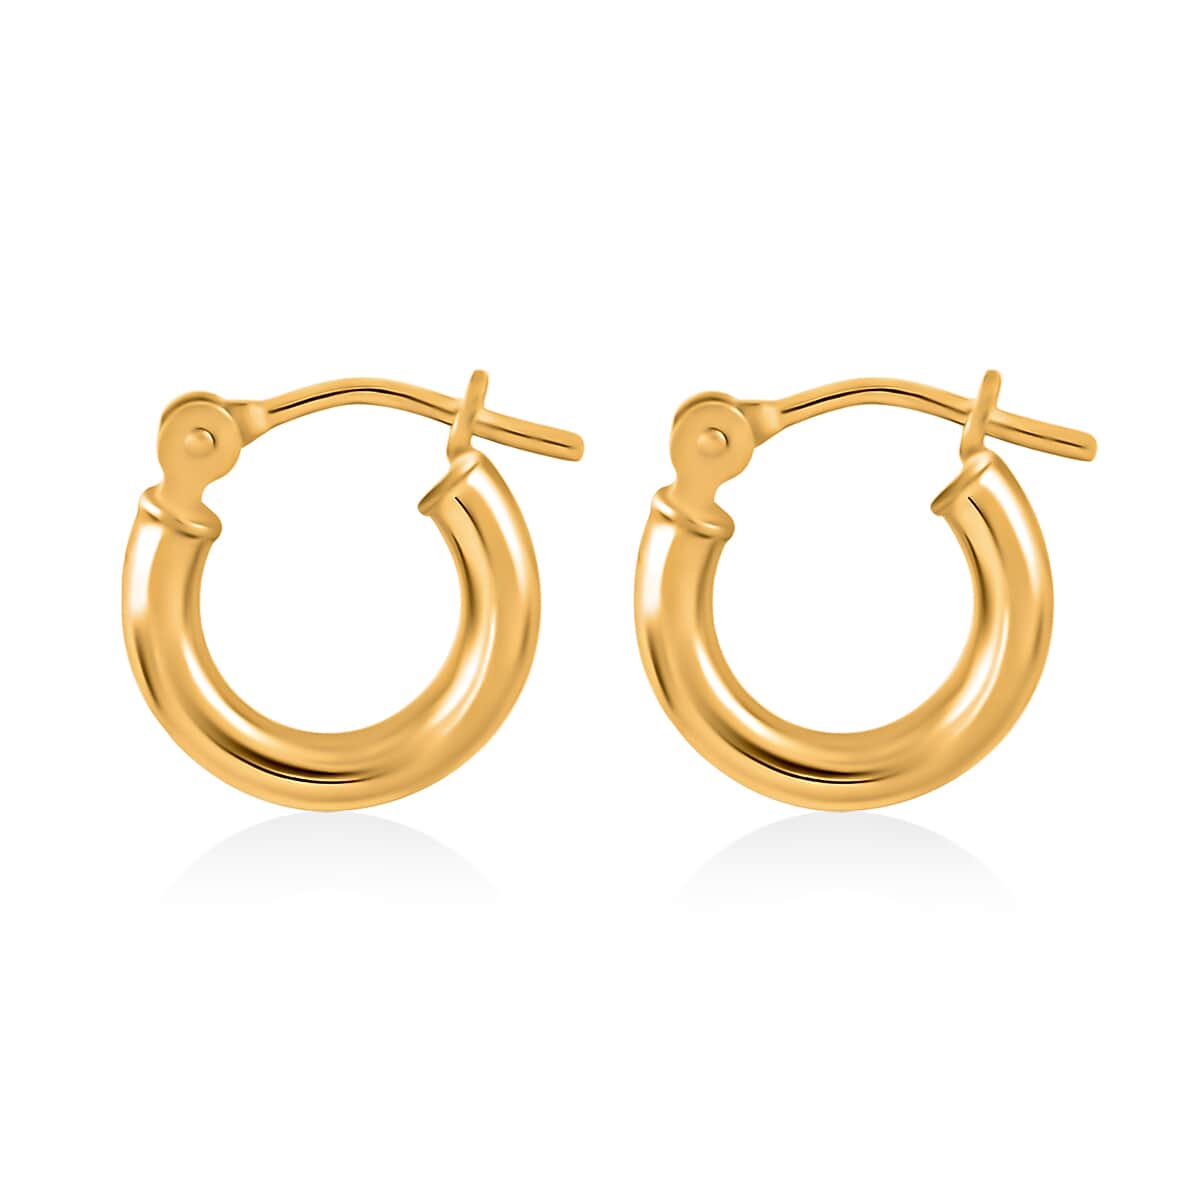 10K Yellow Gold Hoop Earrings, Gold Hoops, Gold Earrings, Gold Jewelry For Her, Hinged Hoop Earrings, Birthday Gift For Her image number 6